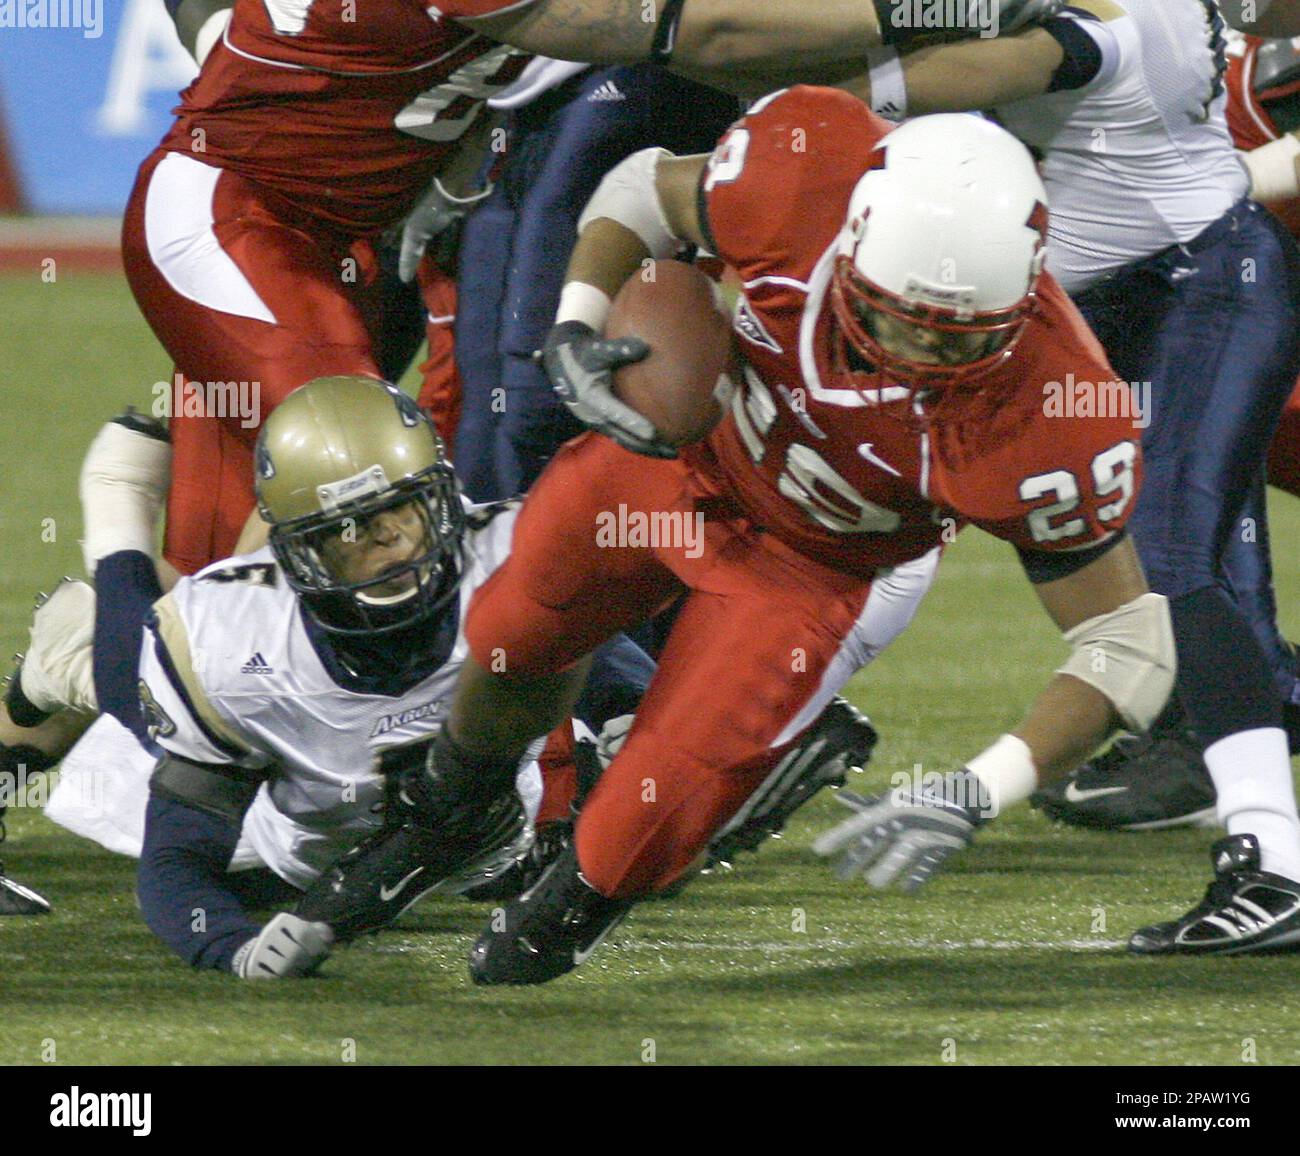 Miami Ohio running back Austin Sykes (29) is brought down by Akron  defensive back Davanzo Tate (5) in the first quarter during their football  game Wednesday, Nov. 14, 2007, in Oxford, Ohio. (